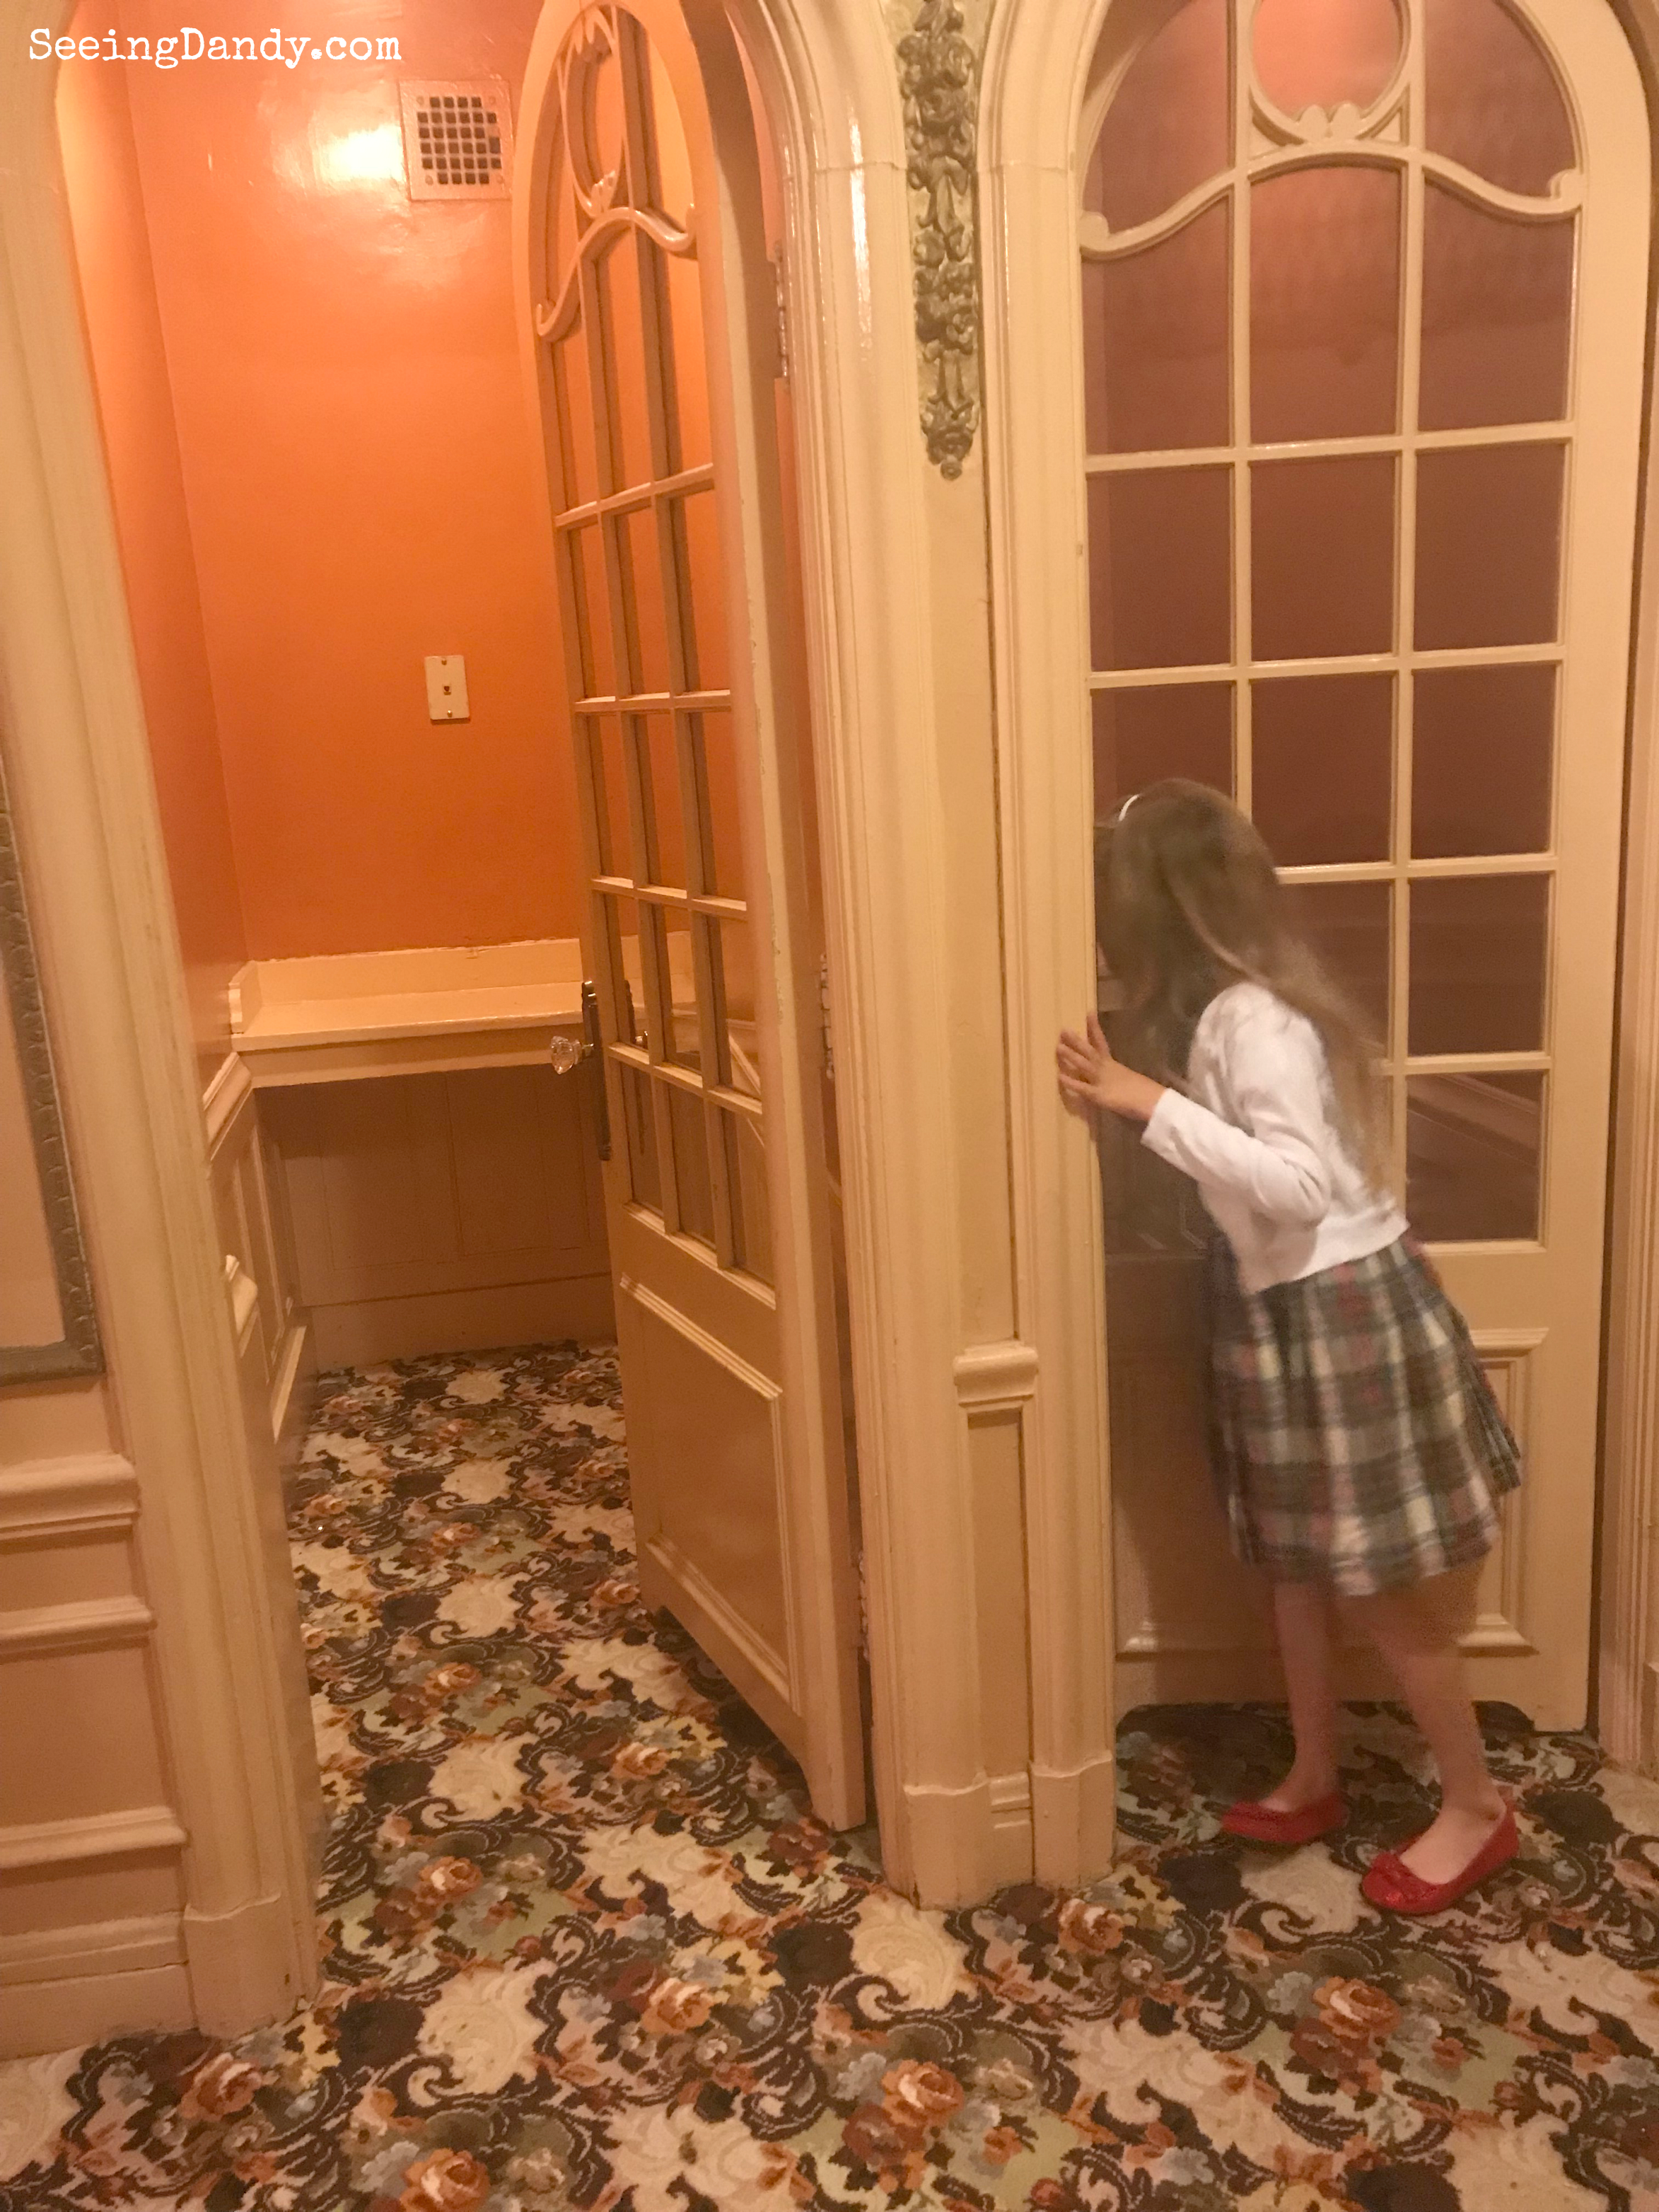 Fox Theatre antique phone booth in the powder room for a little girl's Christmastime birthday.